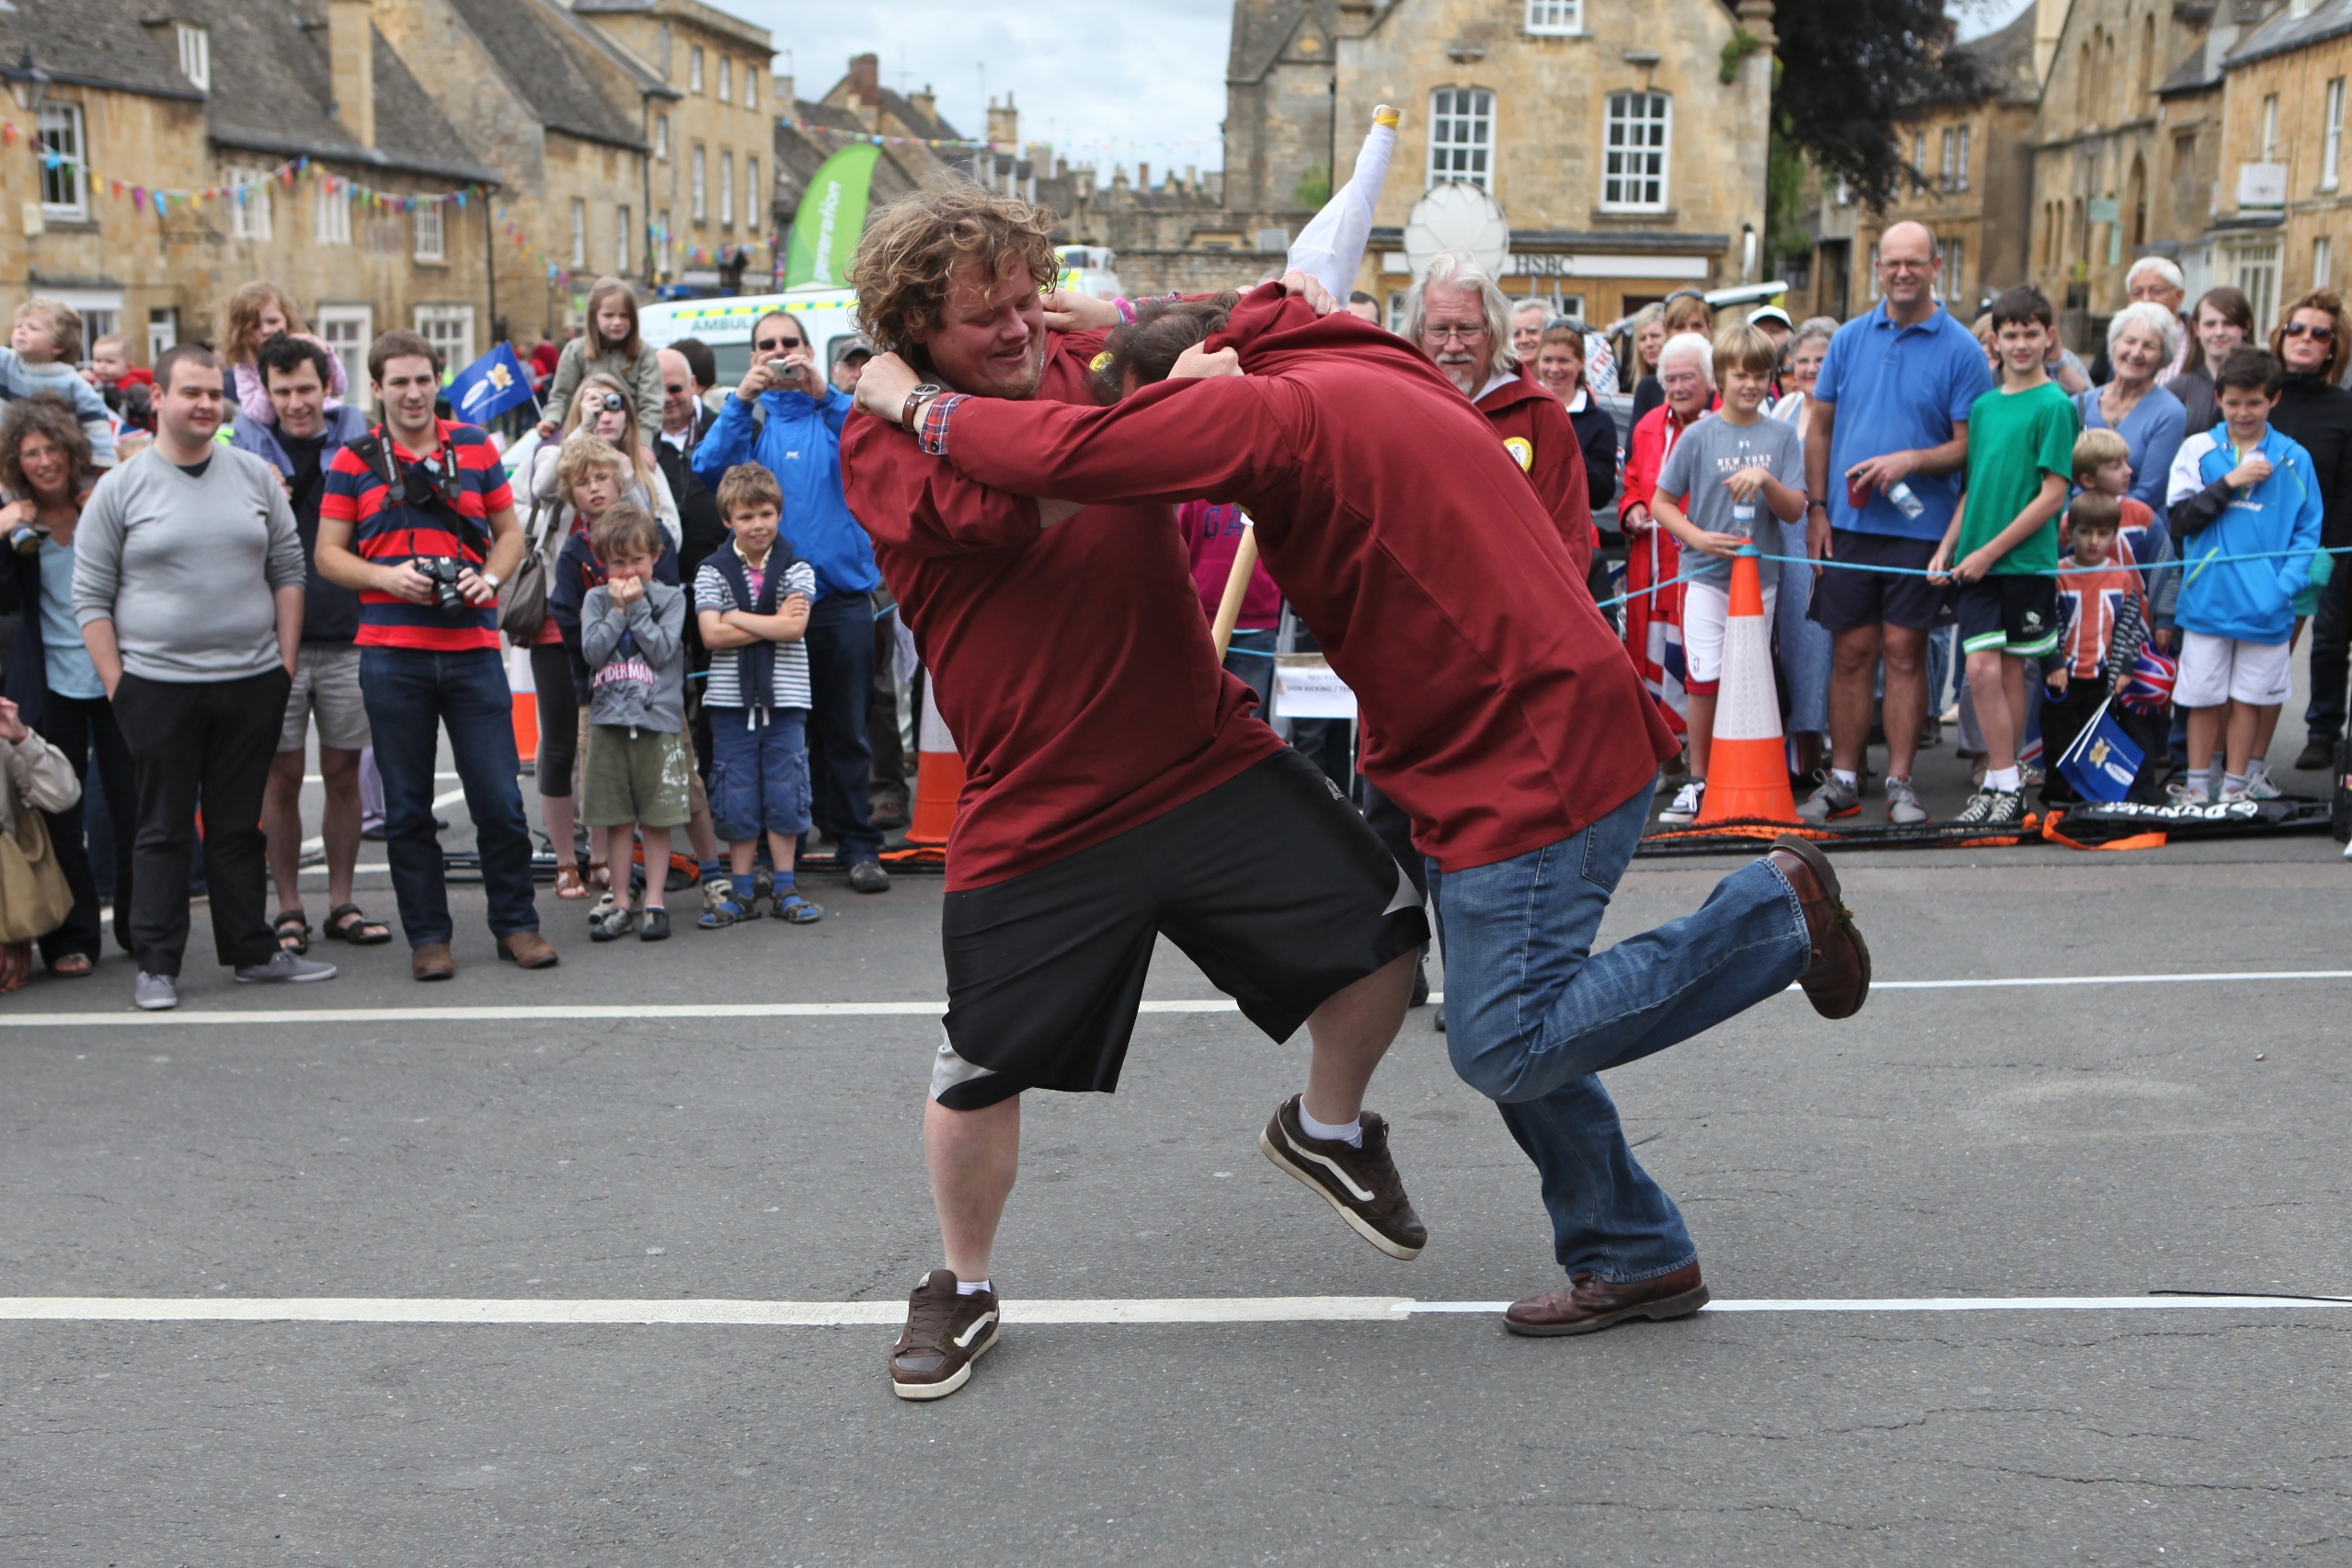 Traditional Cotswold 'shin-kicking' competition saved by council